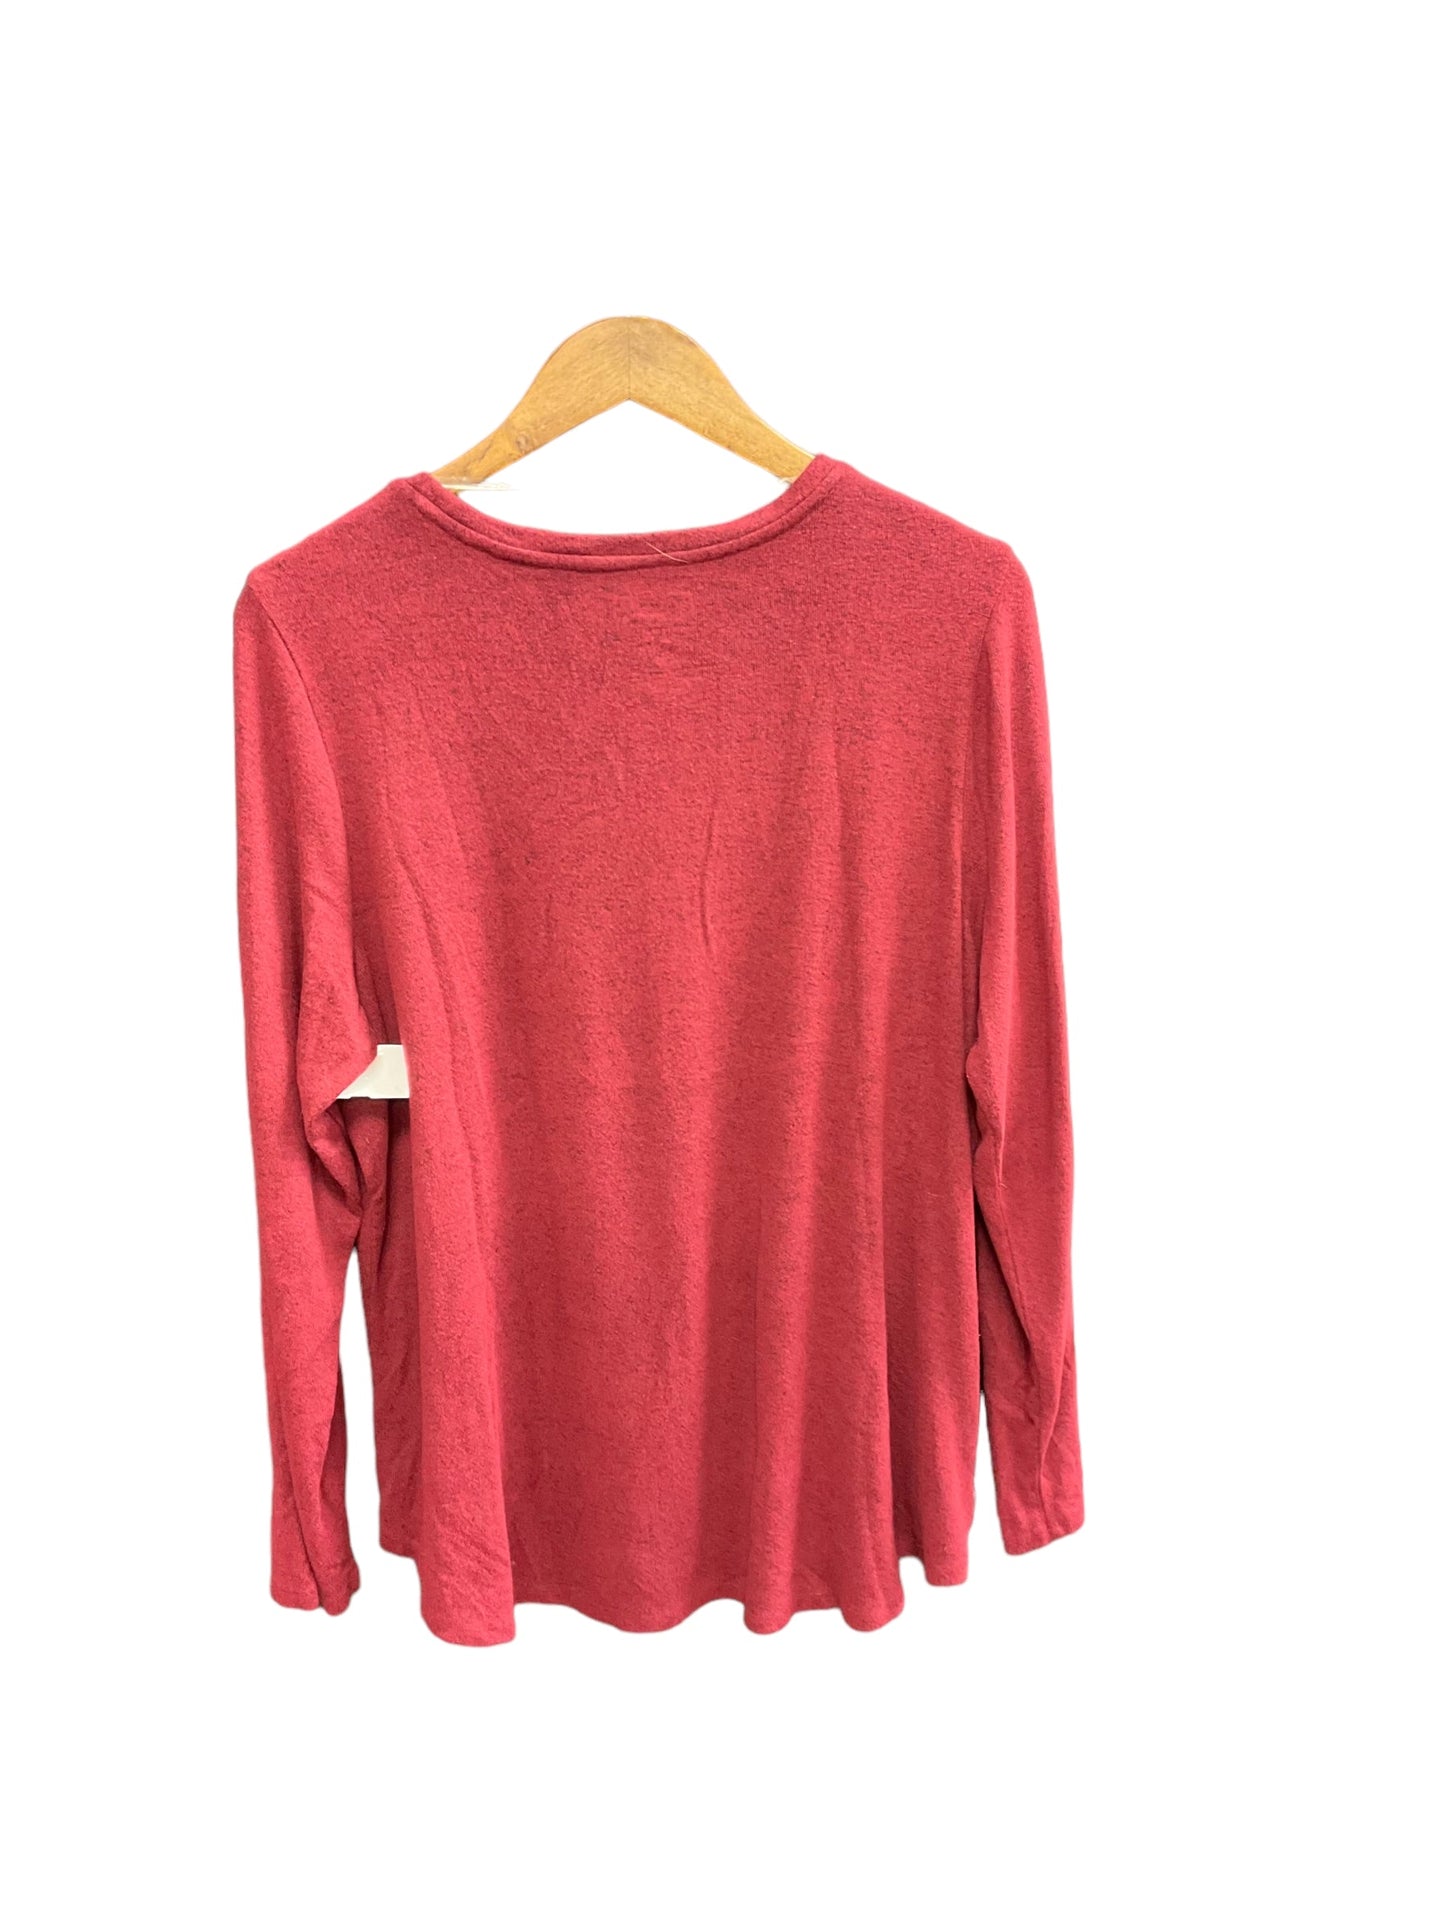 Top Long Sleeve By Sonoma  Size: Xxl